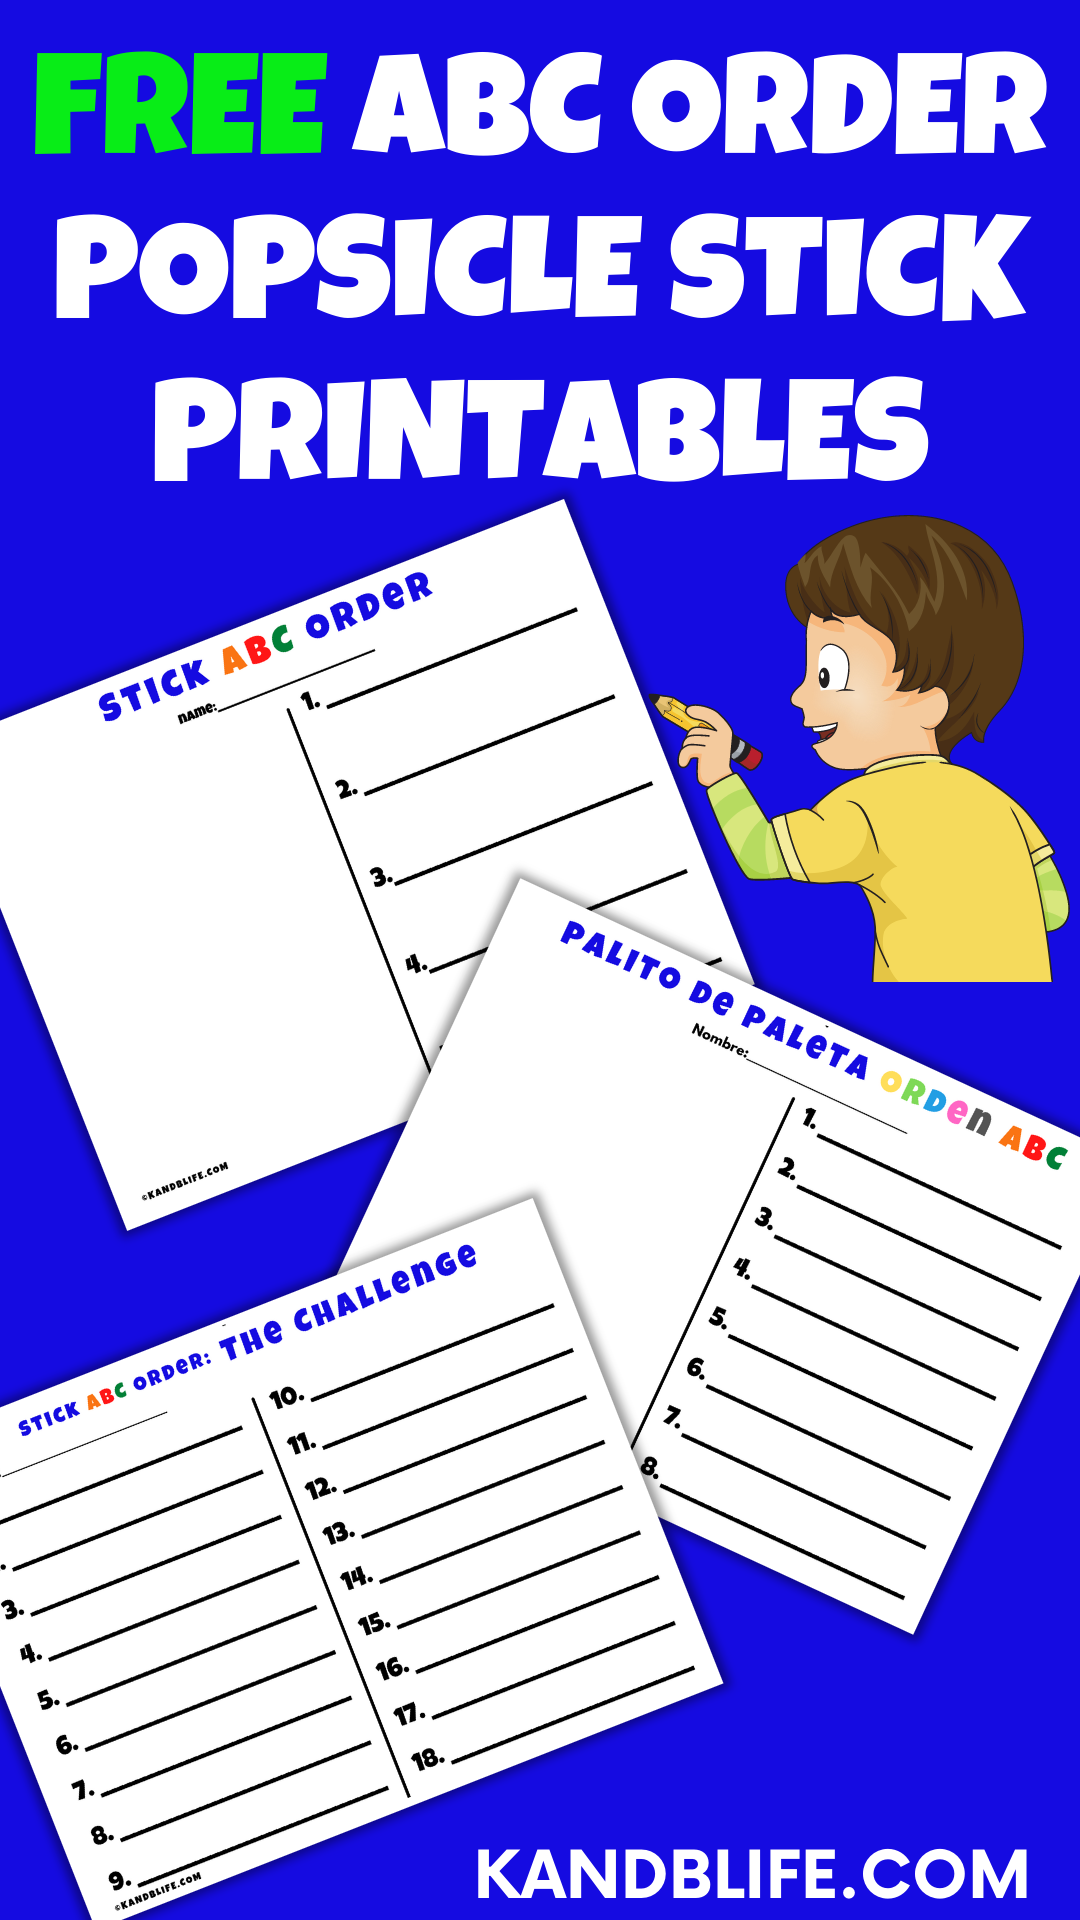 ABC Order sample pages for the Free ABC Order Popsicle Stick Printable